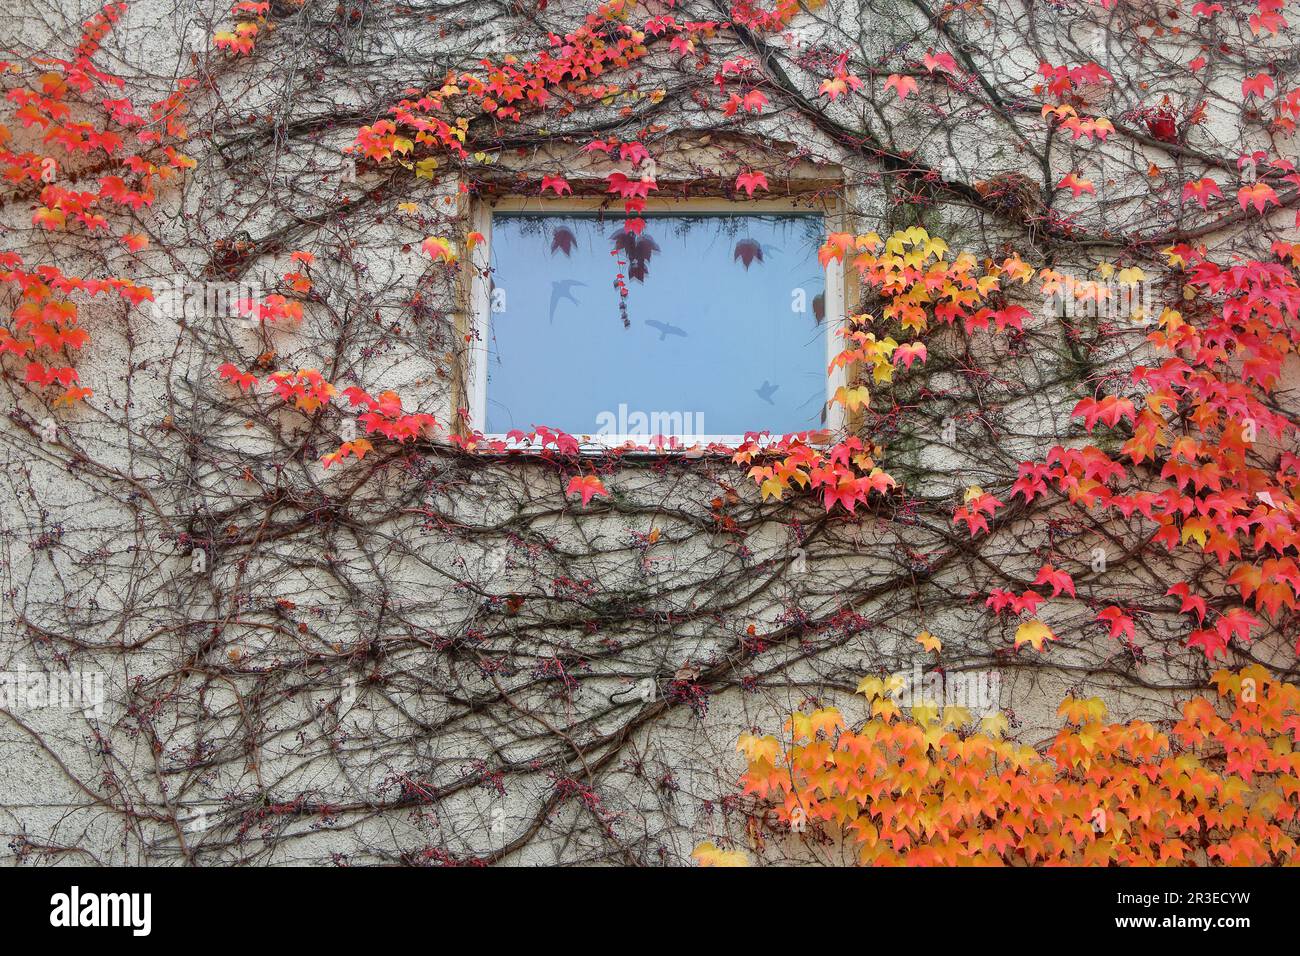 Photo was taken in the German city of Bayreuth. The picture shows a wall of a house with a window overgrown with girlish grapes, the leaves of which a Stock Photo